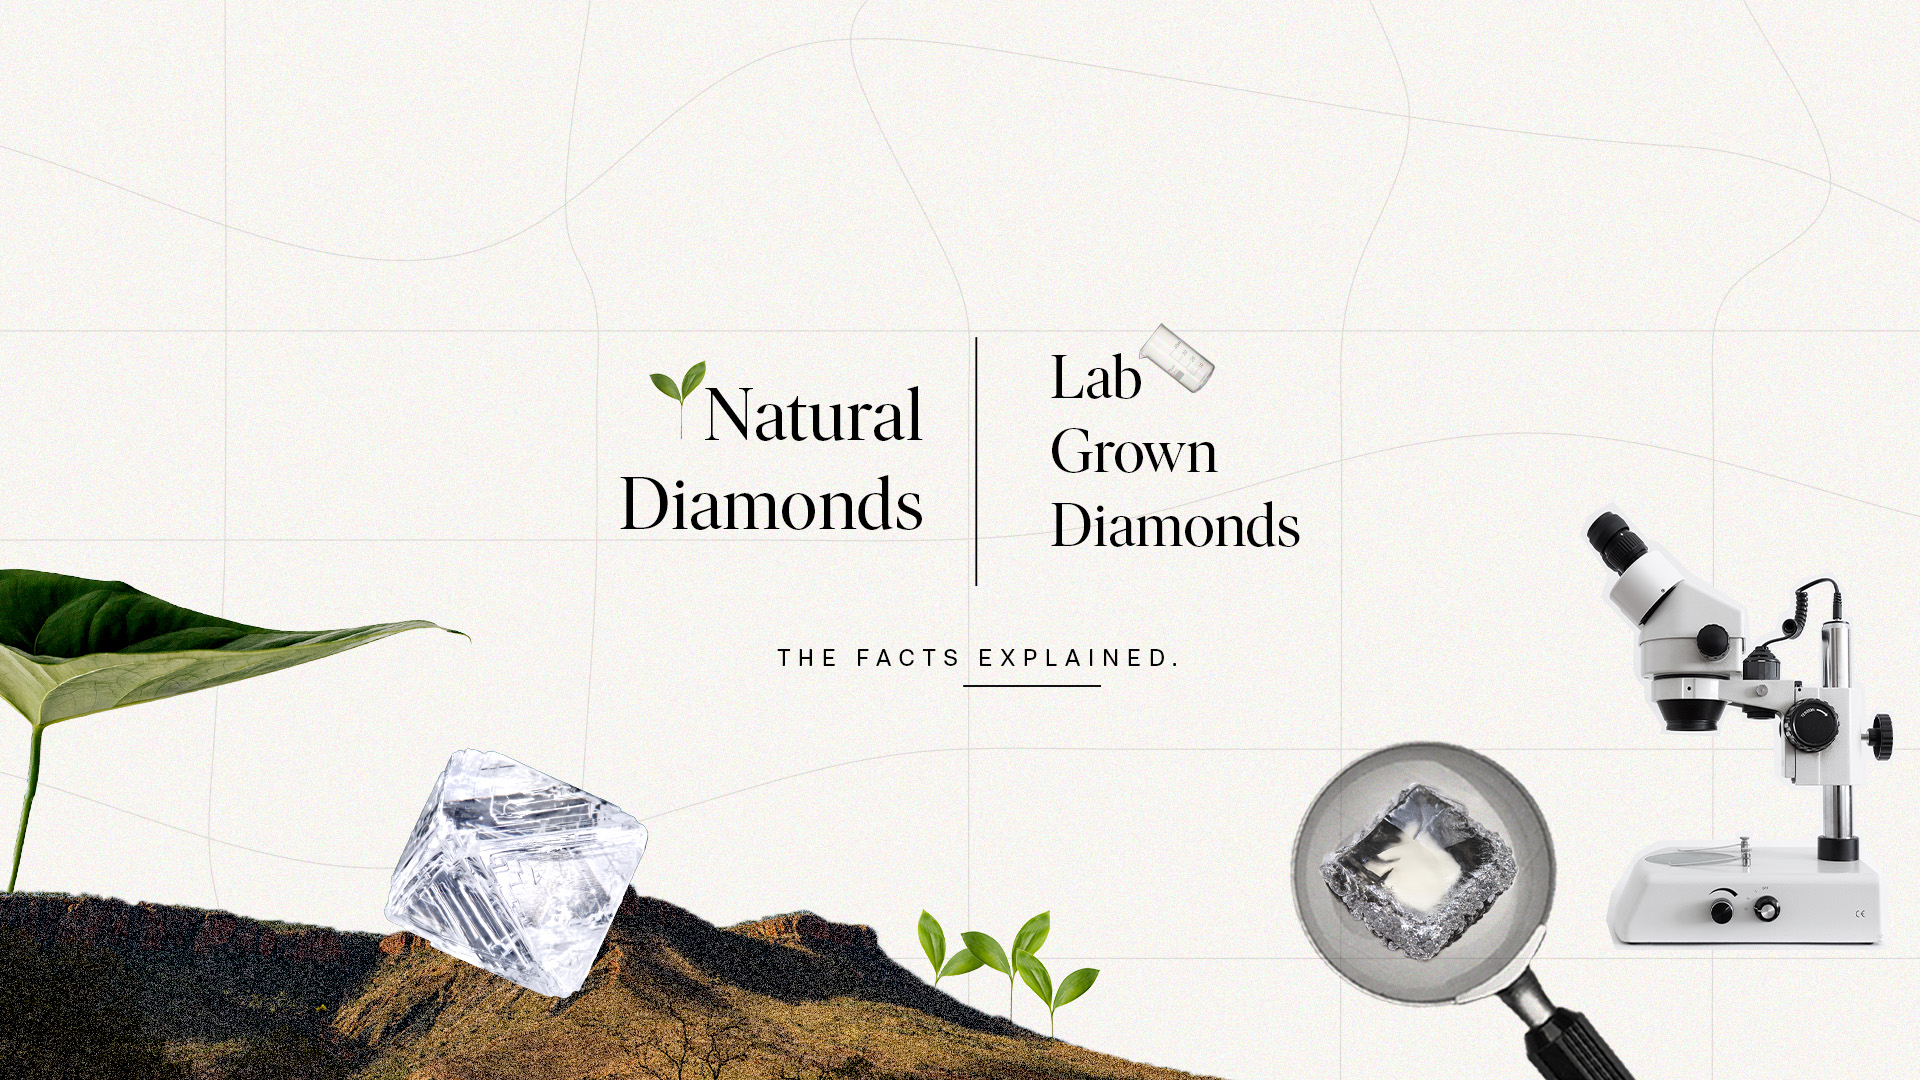 Natural diamonds and Lab Grown Diamonds – facts explained